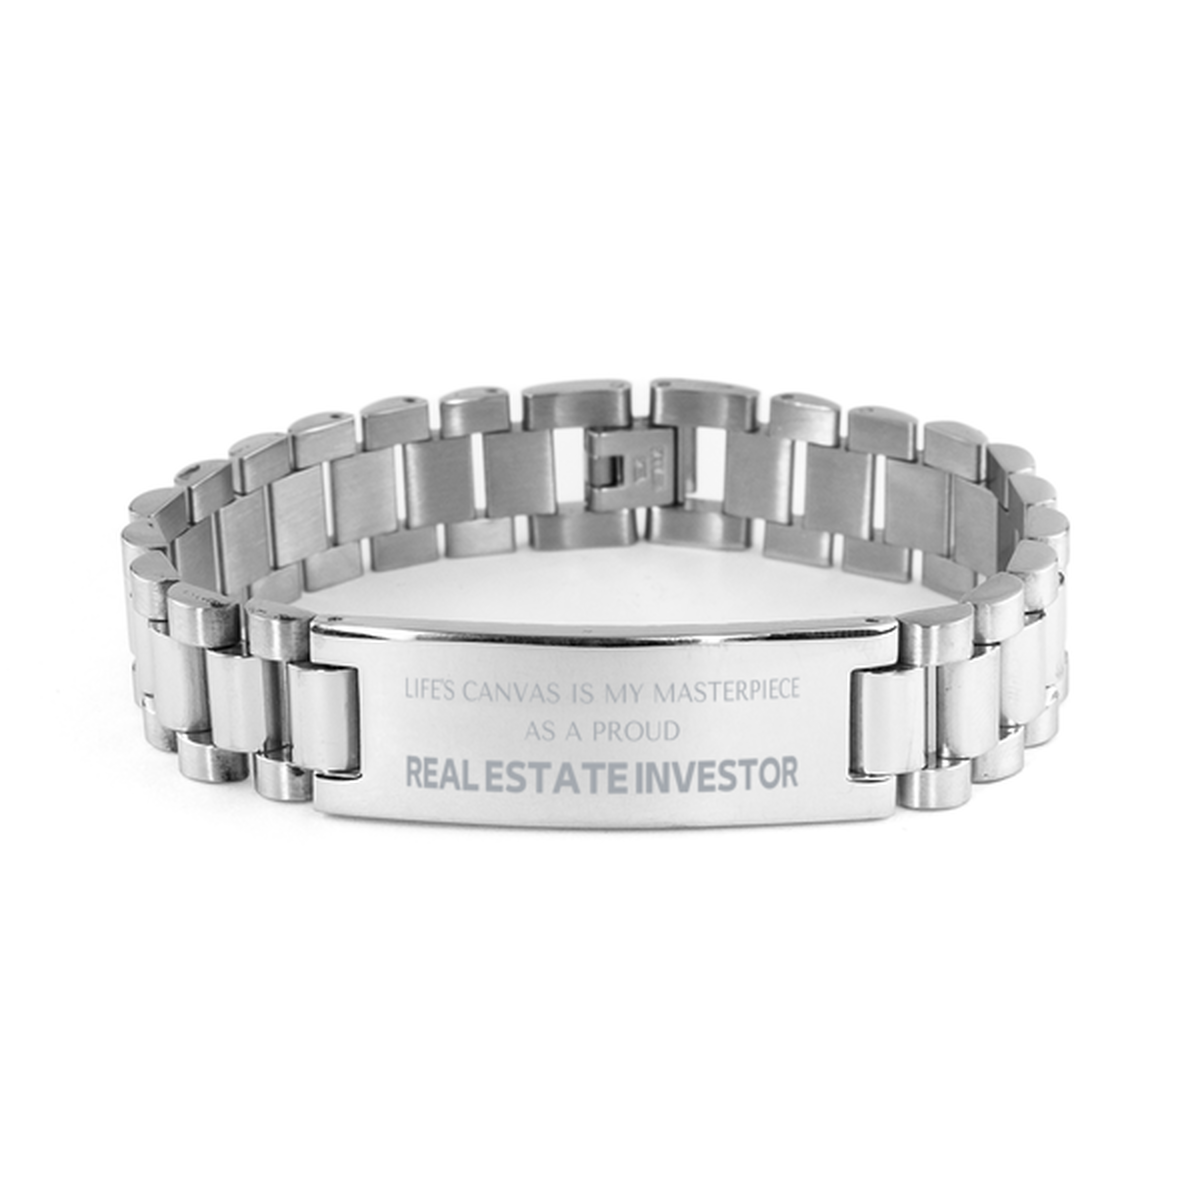 Proud Real Estate Investor Gifts, Life's canvas is my masterpiece, Epic Birthday Christmas Unique Ladder Stainless Steel Bracelet For Real Estate Investor, Coworkers, Men, Women, Friends